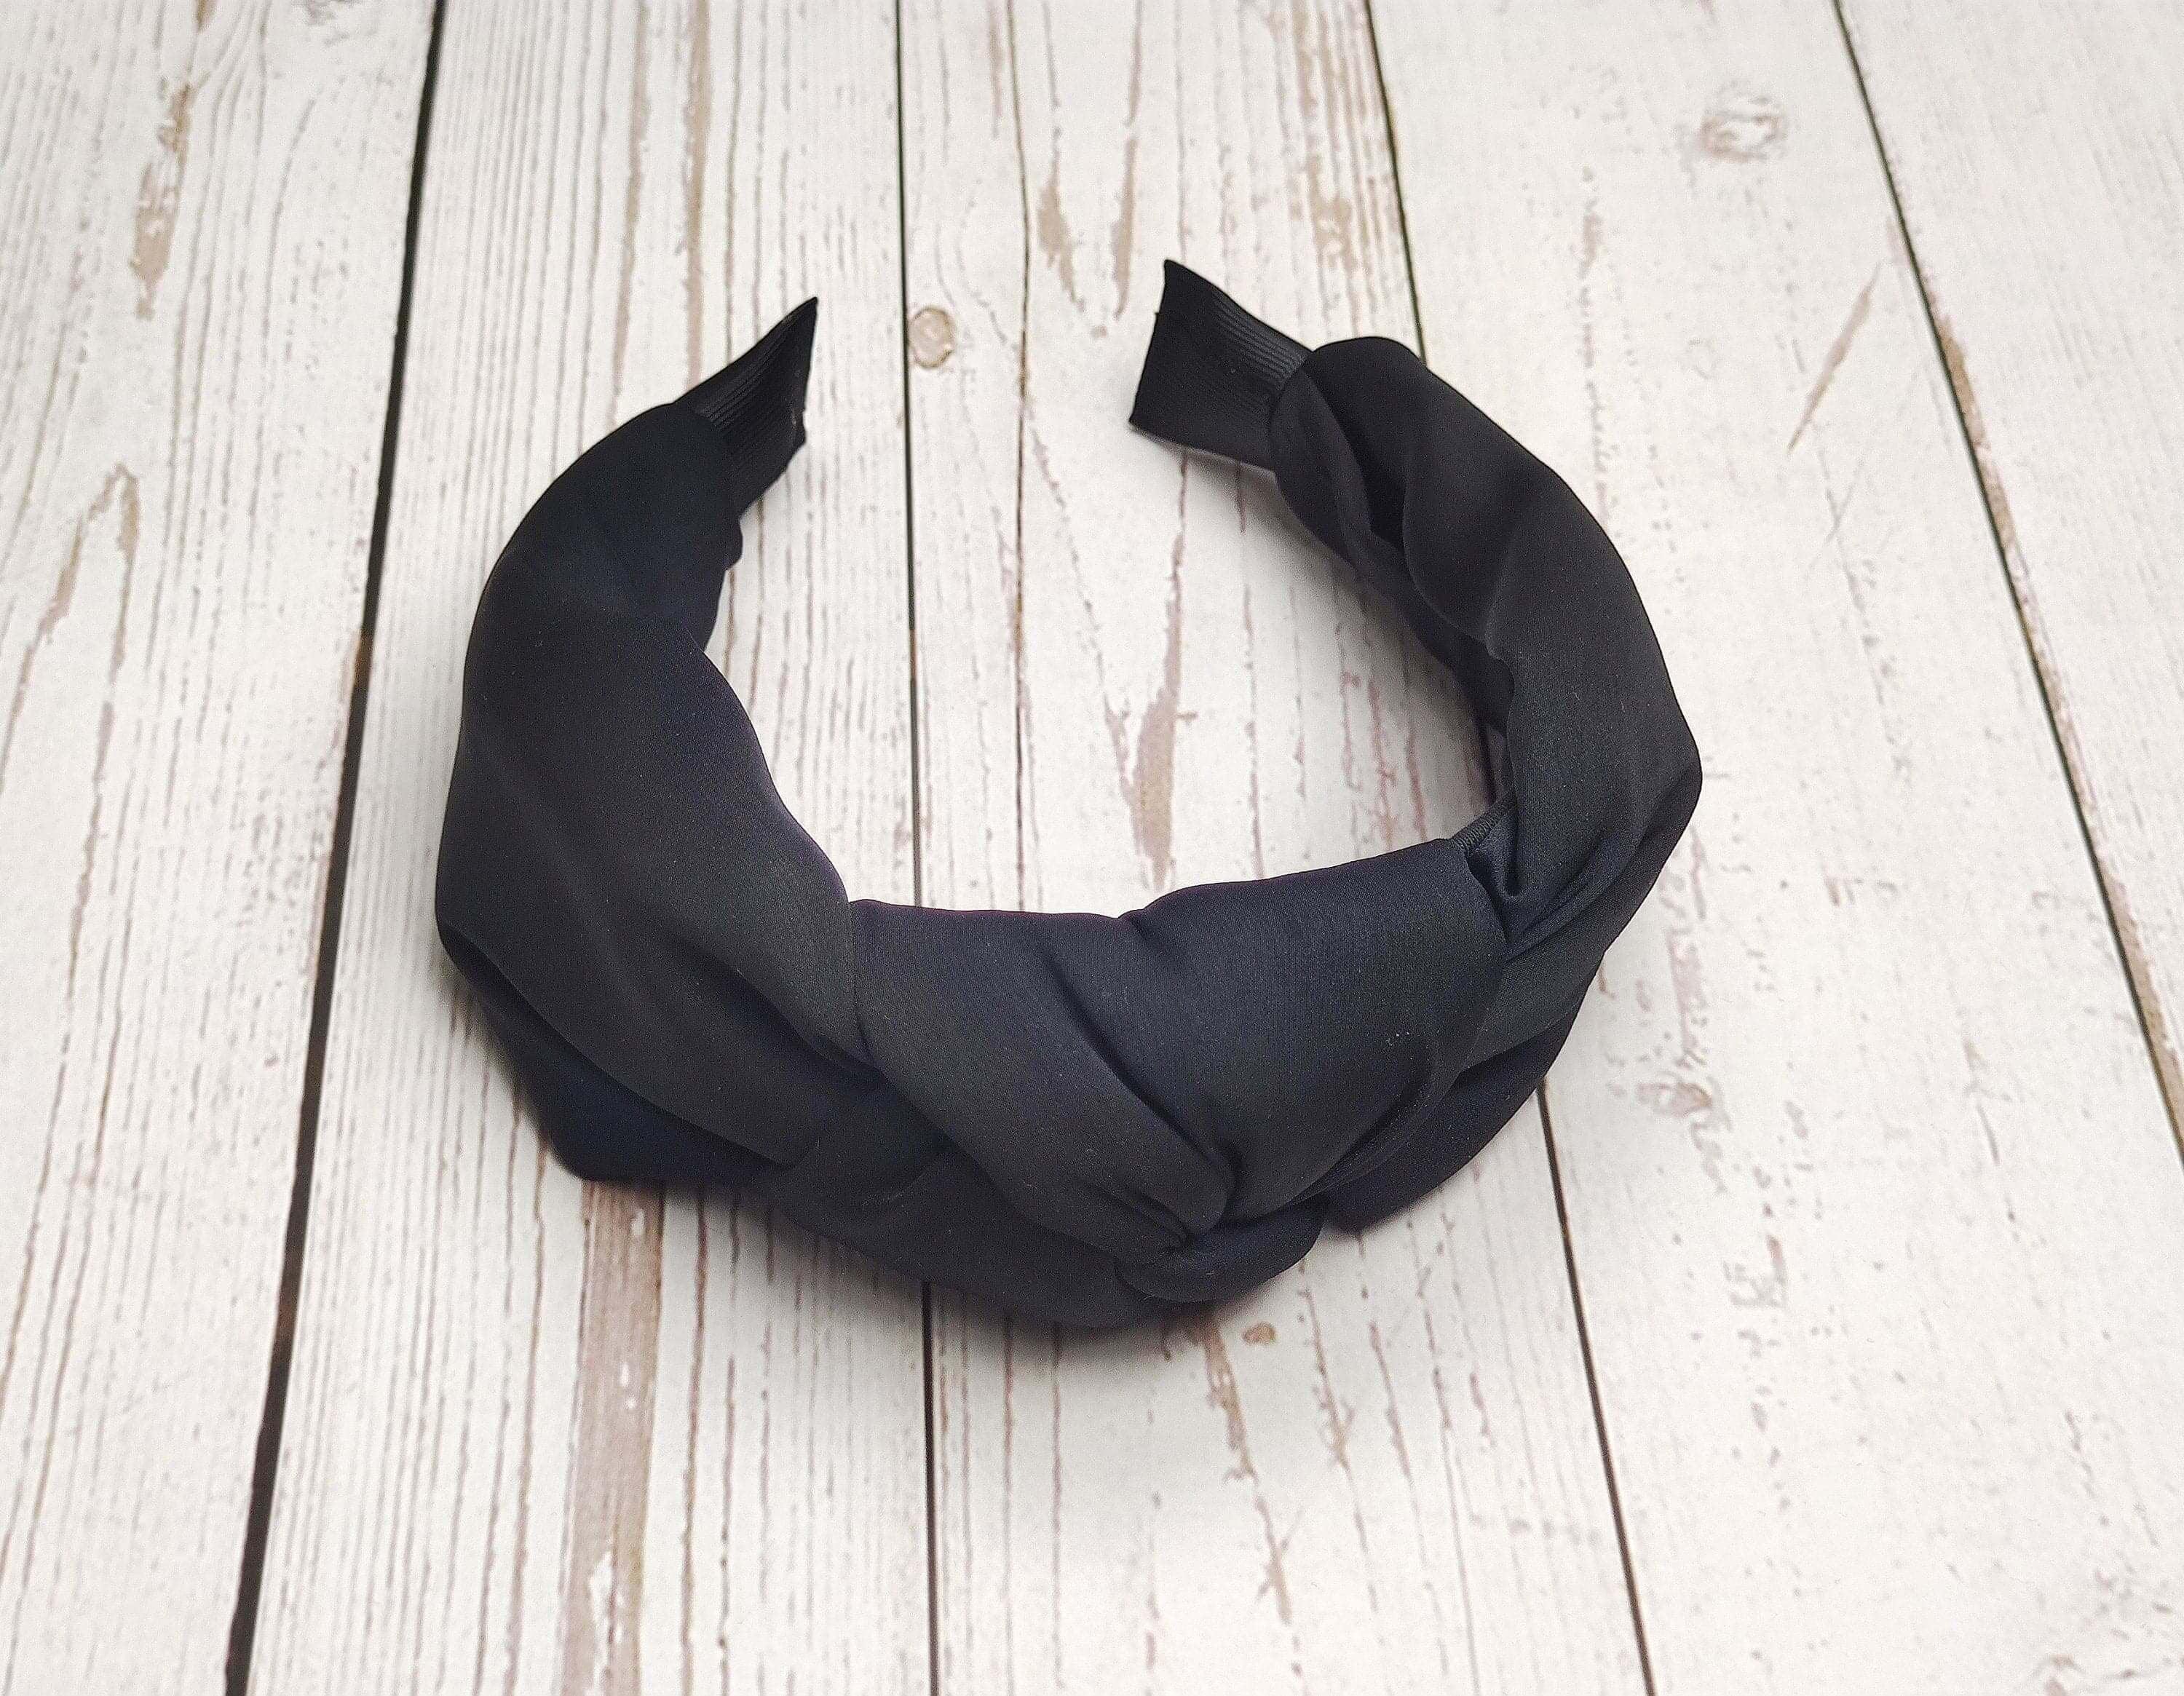 Exquisite Black Knotted Twist Padded Wide Headband, Dark Color Fashionable Viscose Crepe Hair Accessory available at Moyoni Design